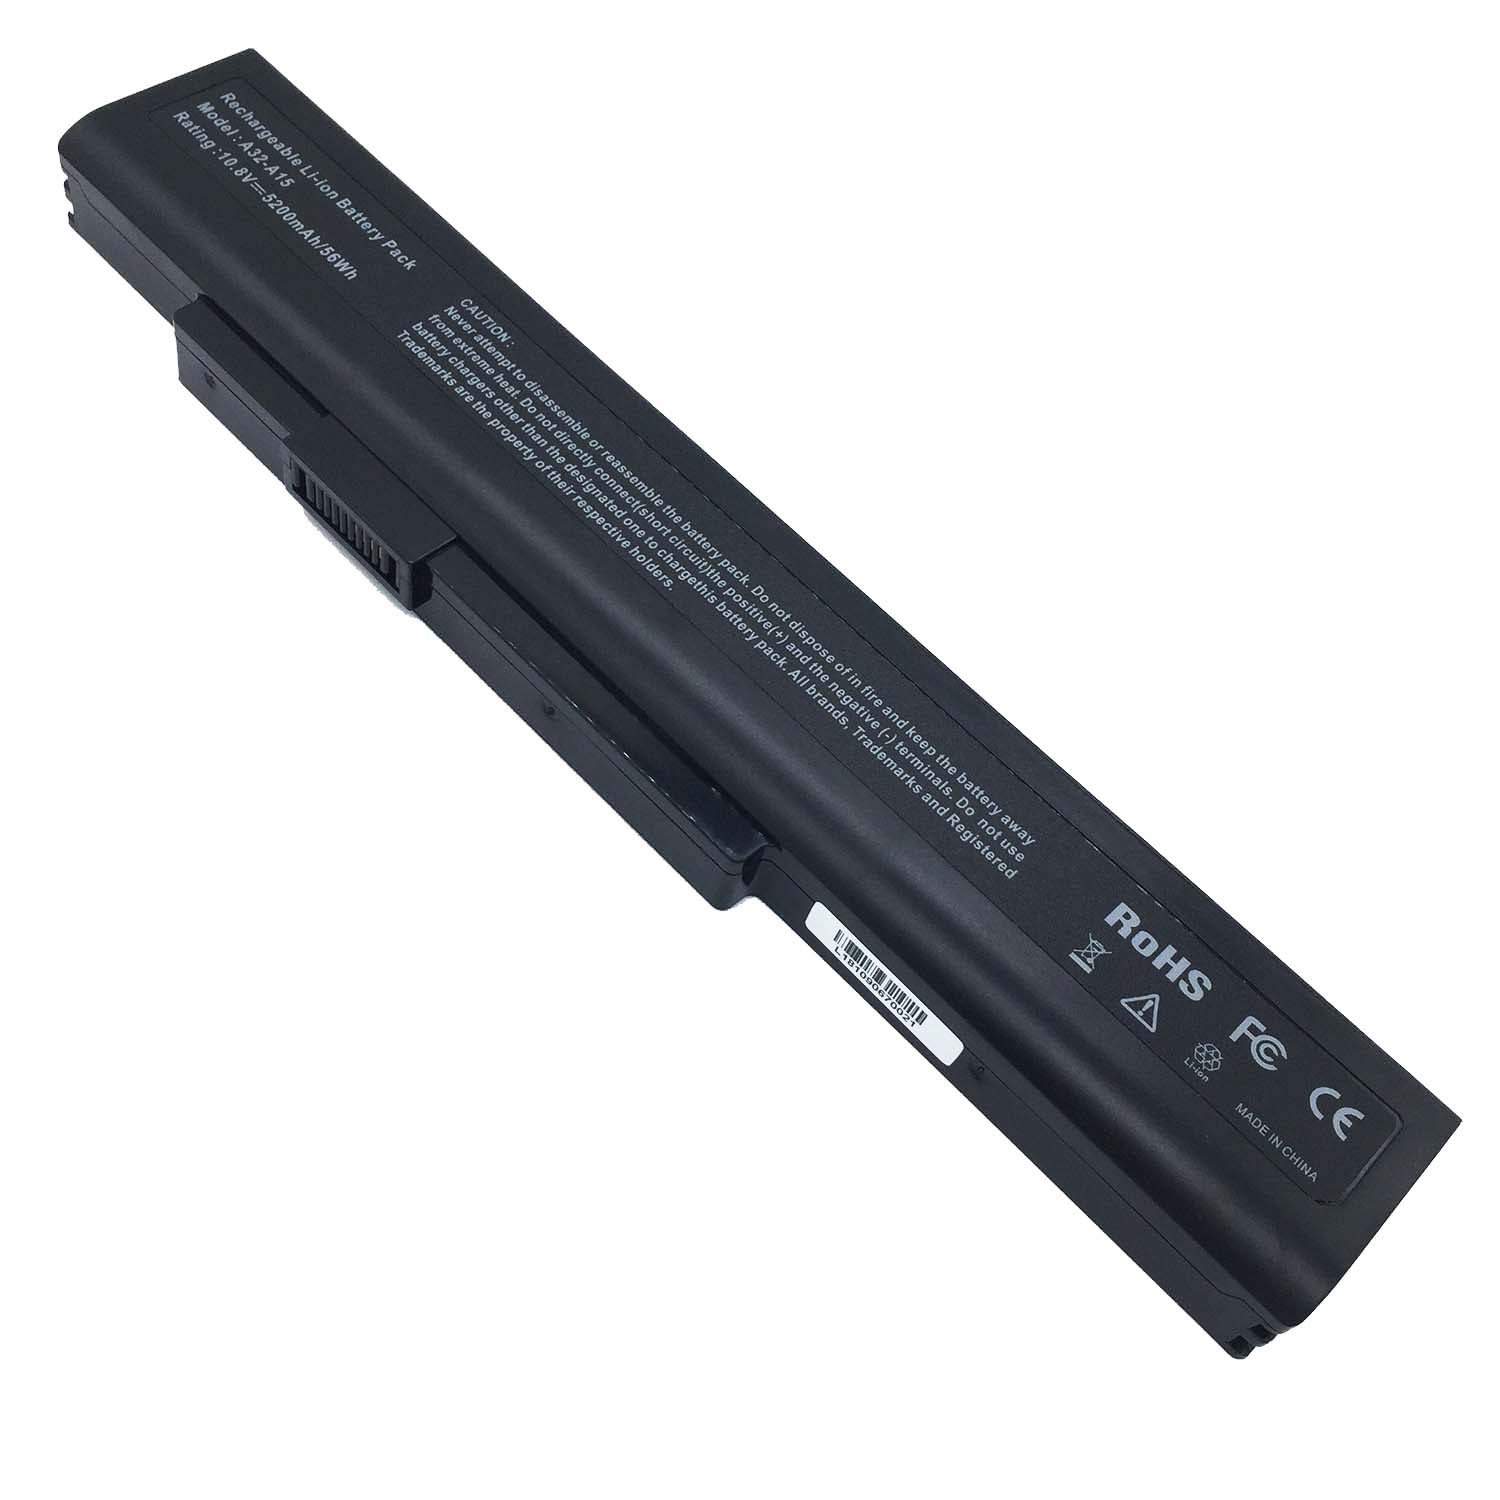 Replacement Battery for Medion Medion Akoya E6201 battery